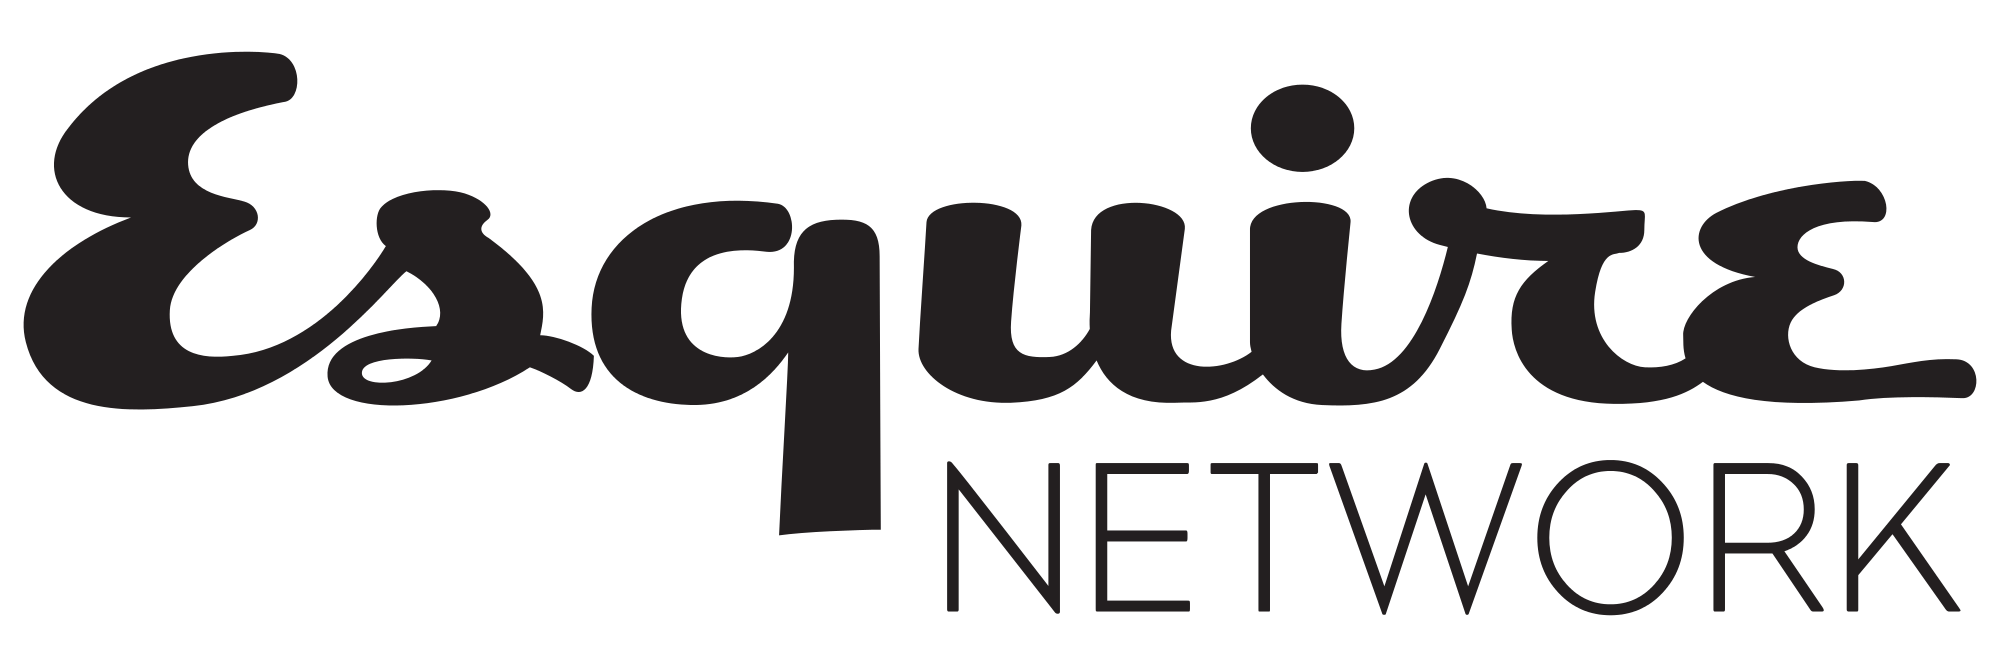 Style Channel Logo - File:Esquire Network.svg - Wikimedia Commons